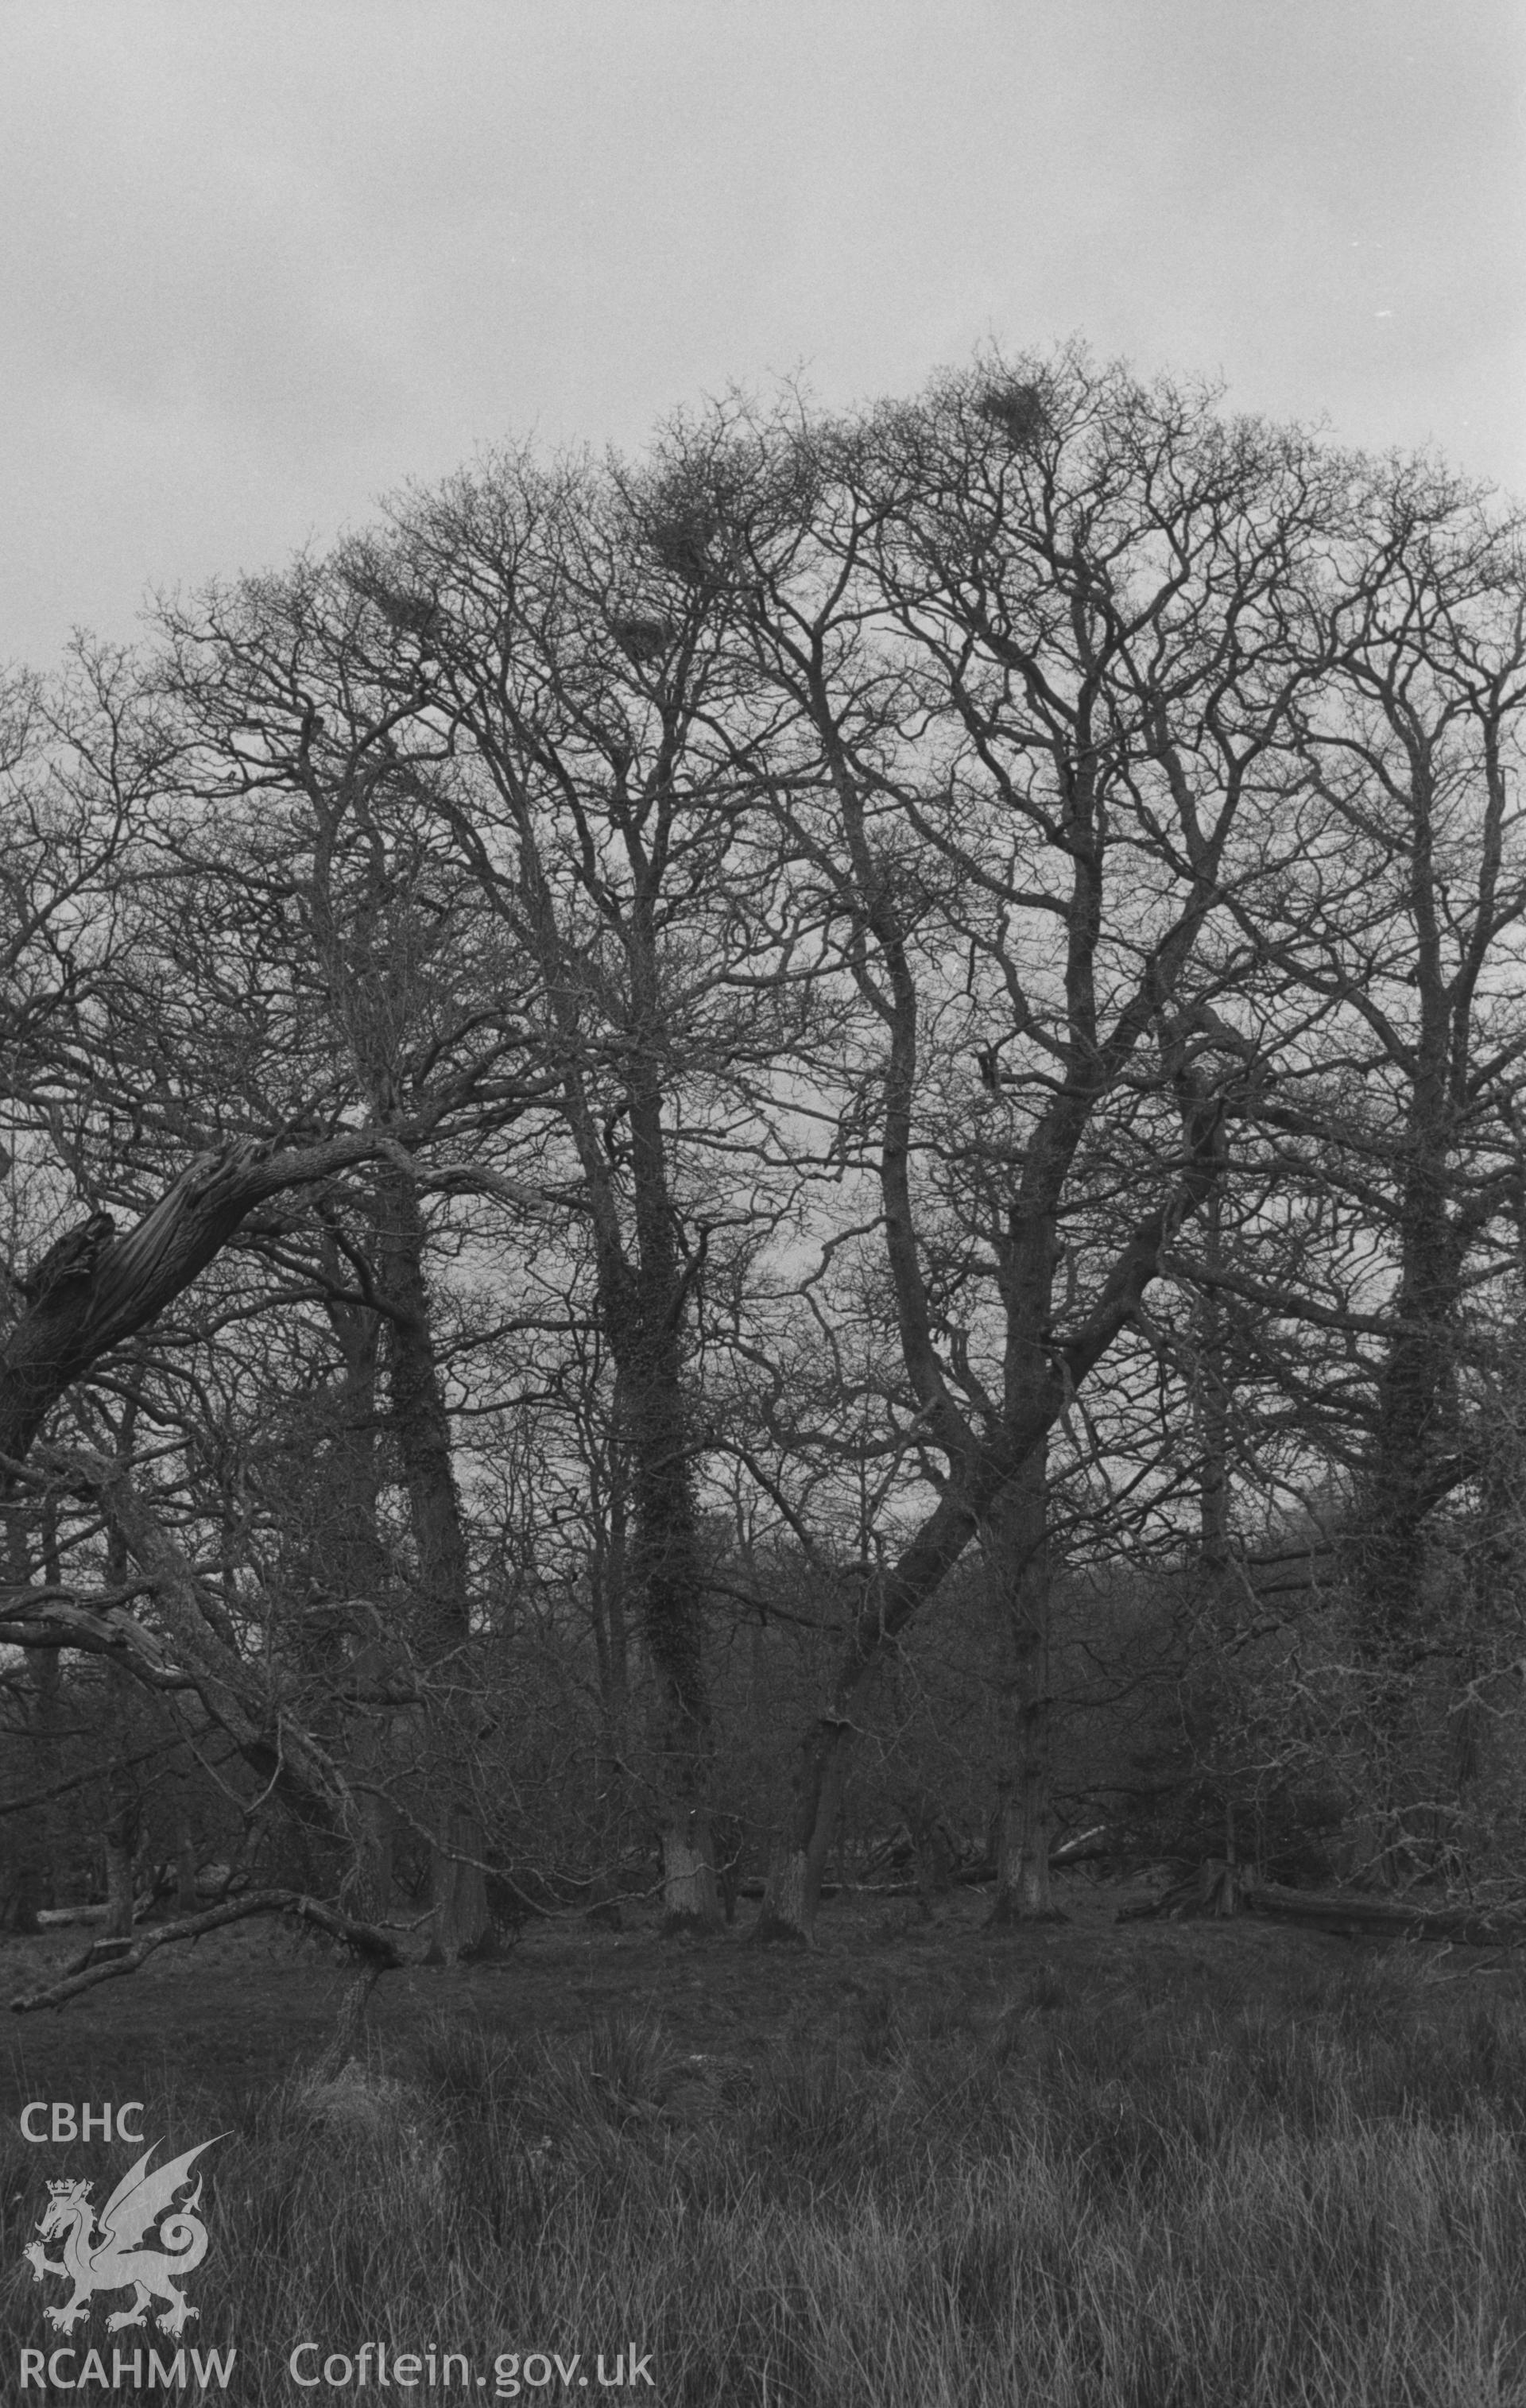 Digital copy of a black and white negative showing heronry at the south end of Manor Wood on the north side of the Teifi near Highmead. Photographed by Arthur O. Chater on 11th April 1967, from Grid Reference SN 507 430.